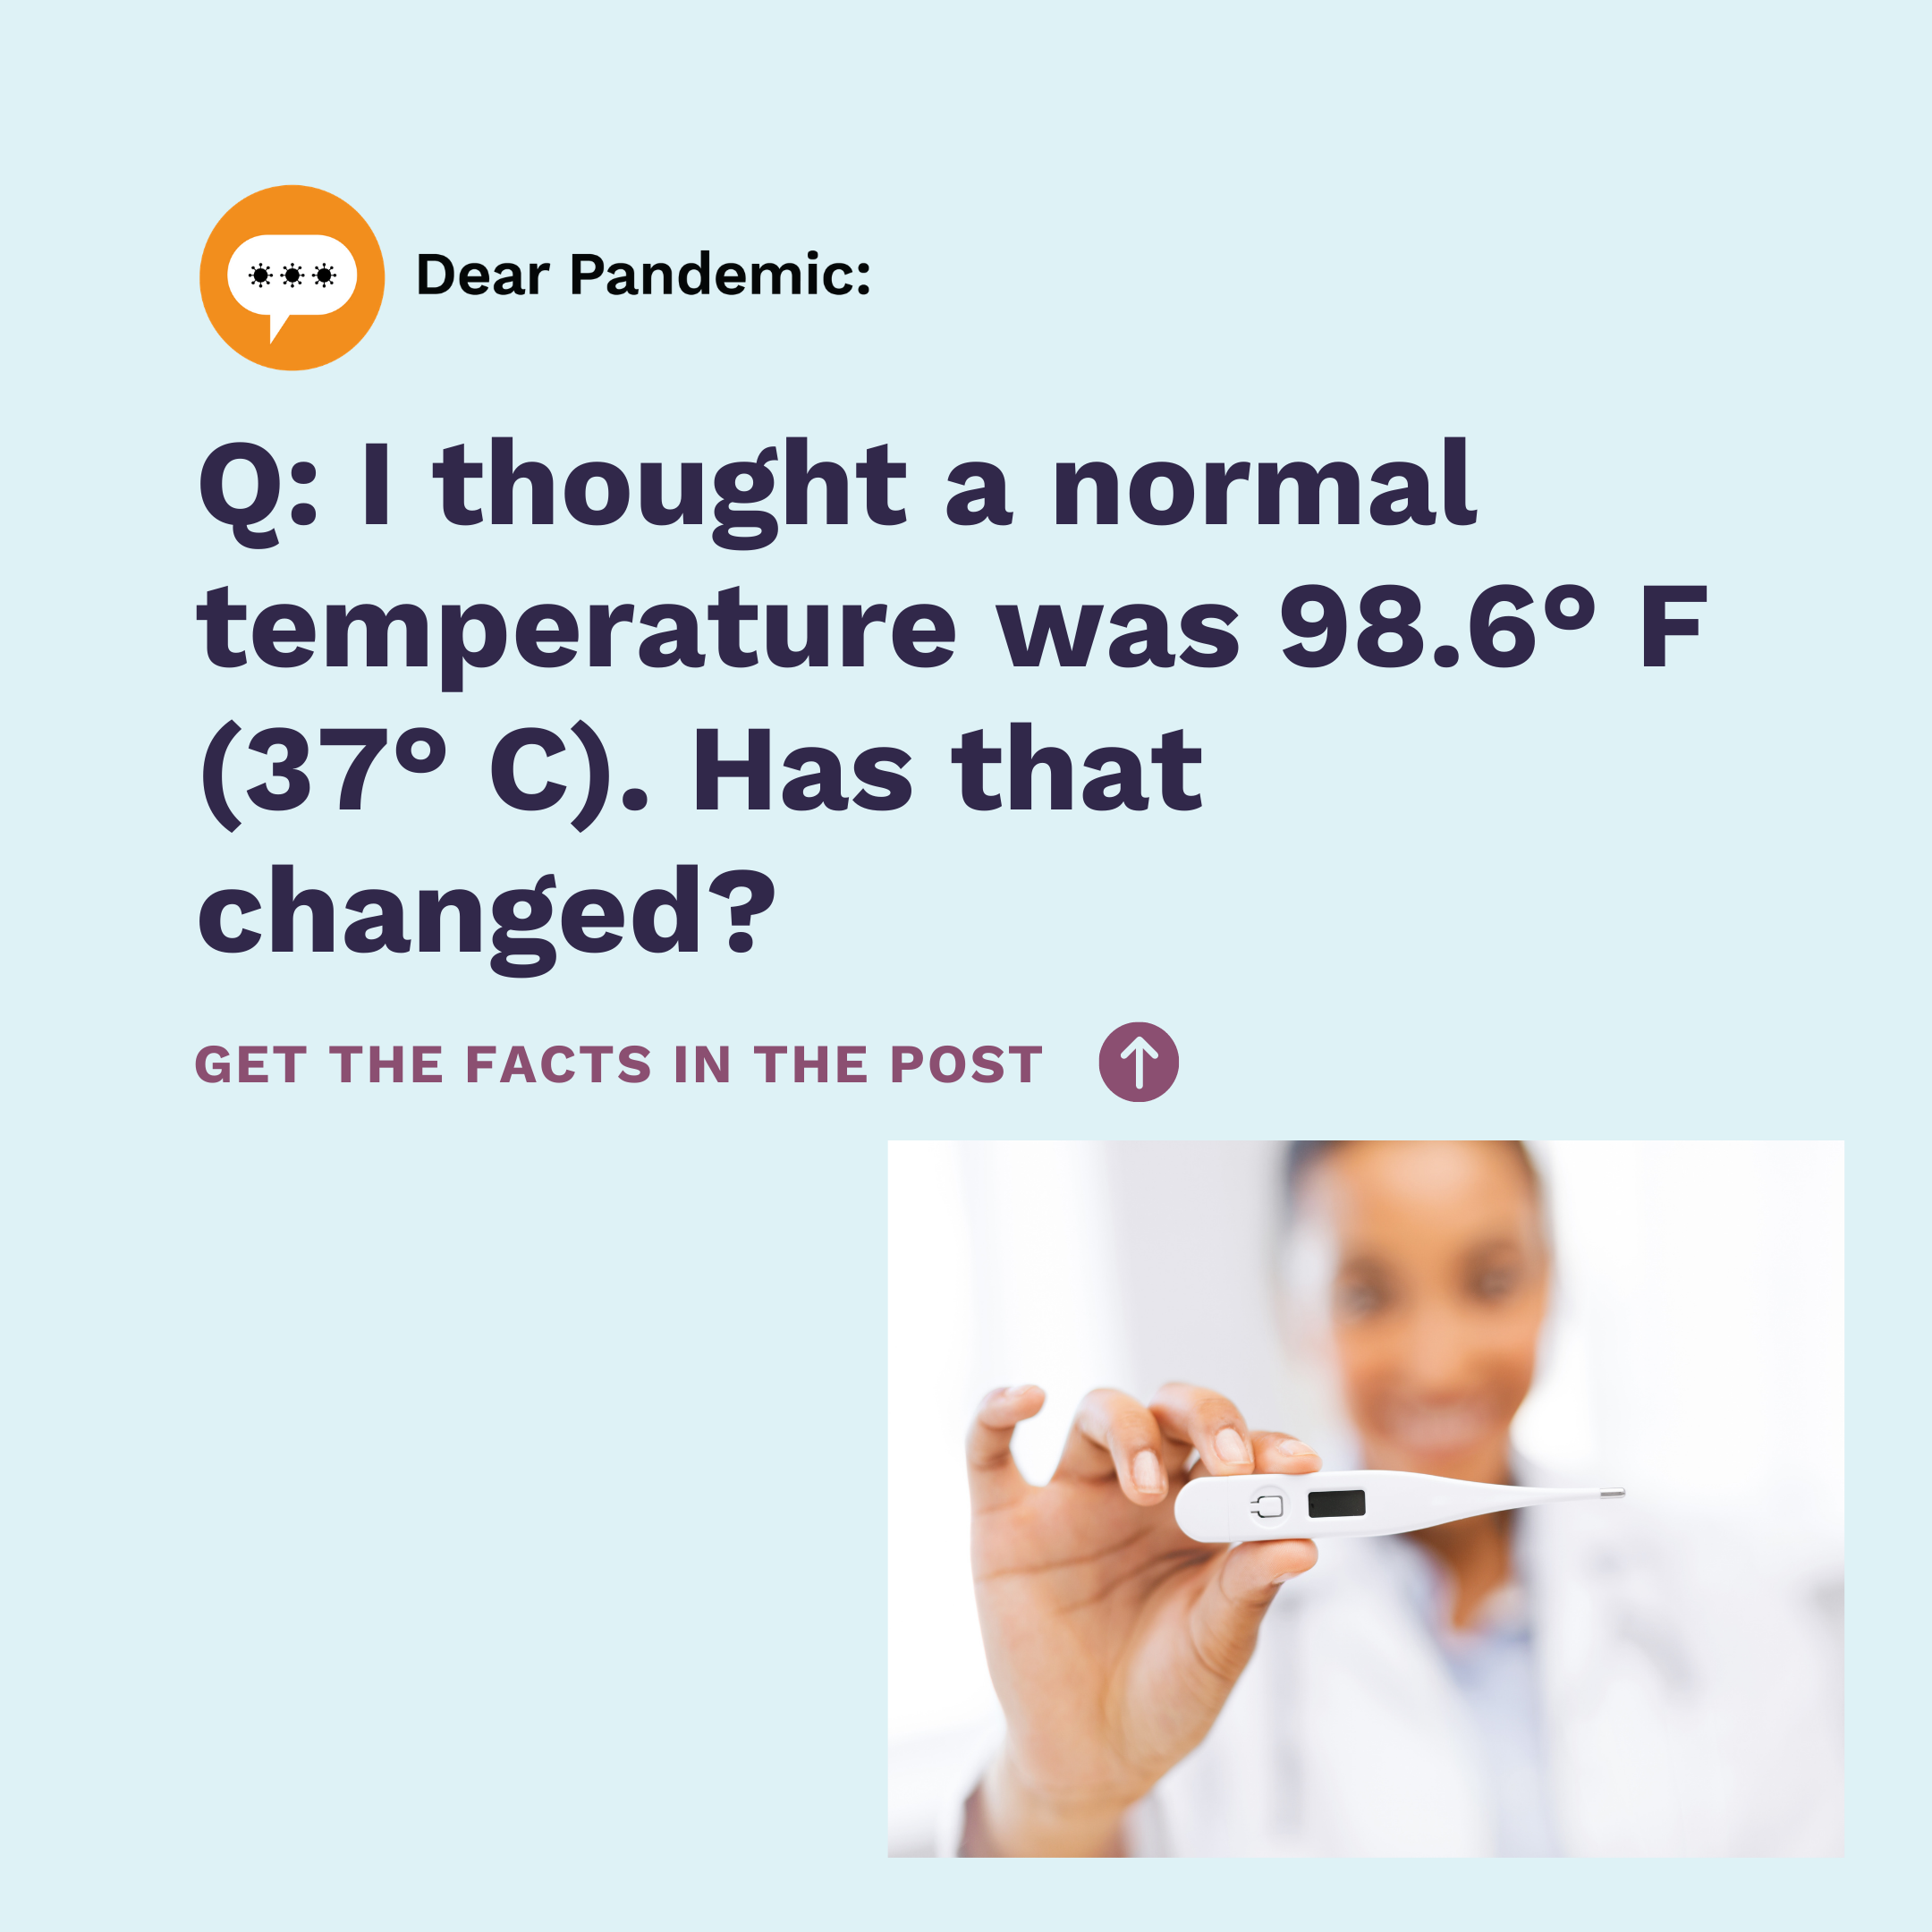 No, the average body temperature is not 98.6 degrees